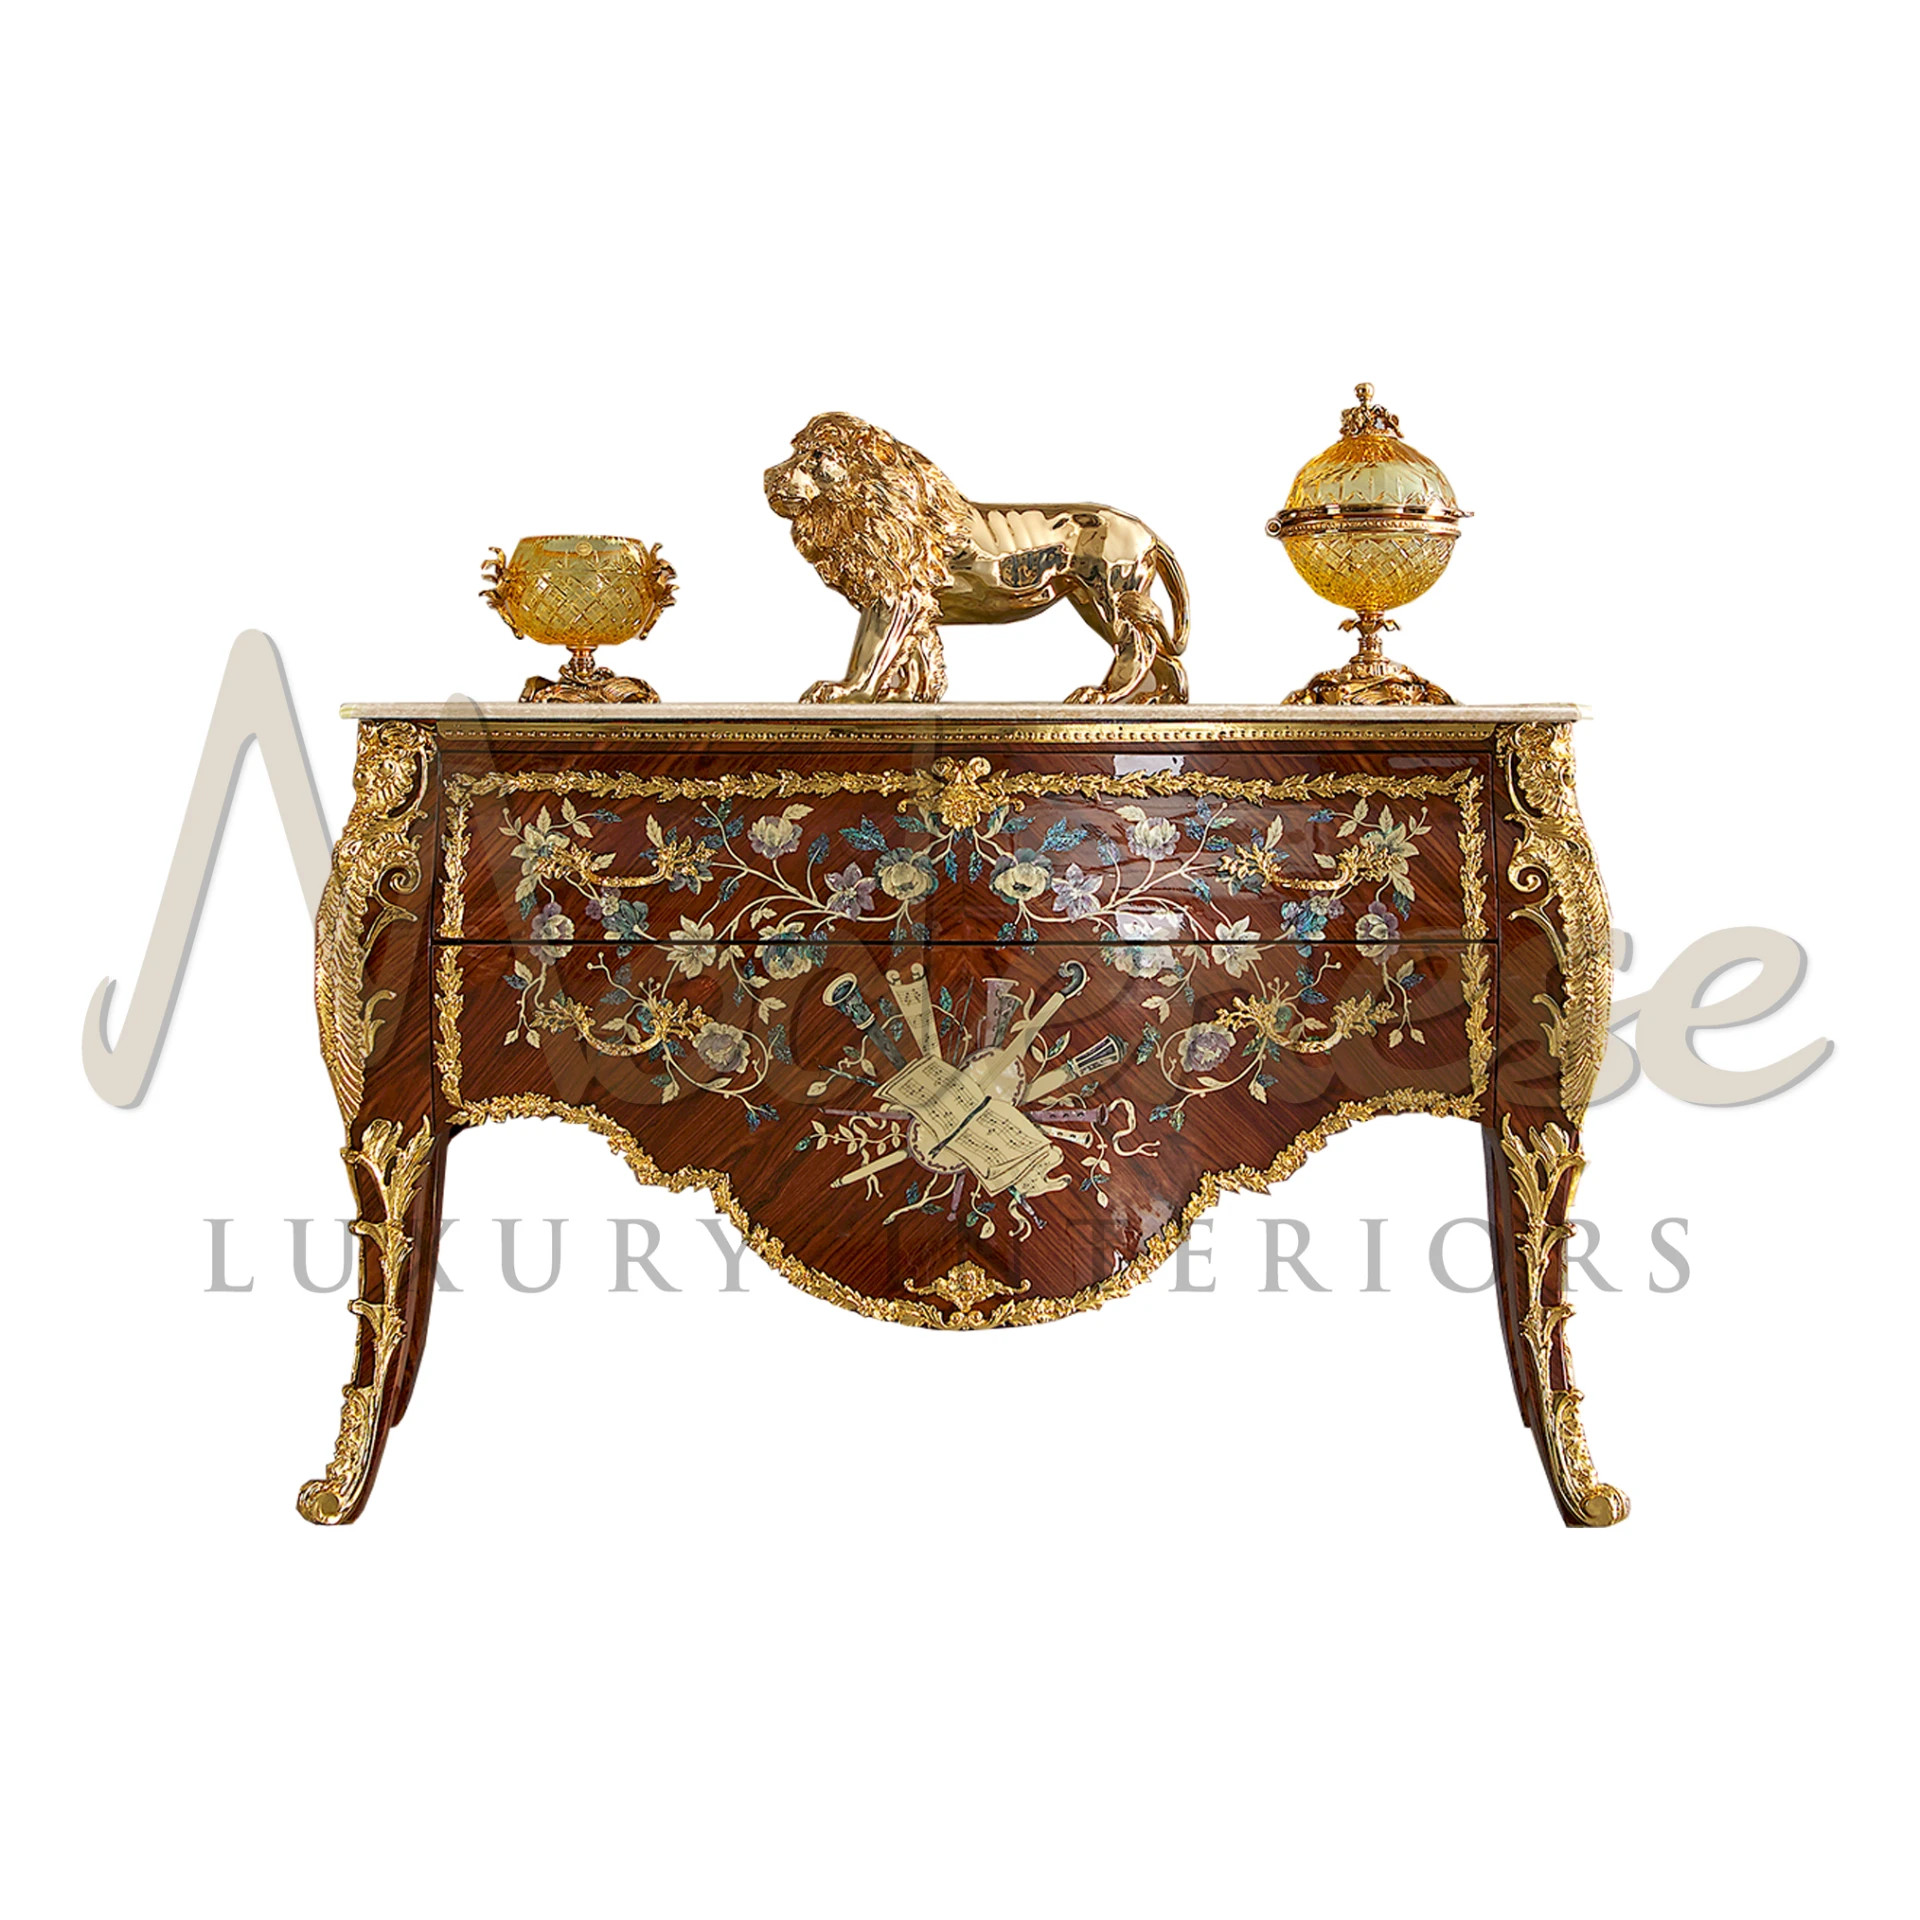 Luxurious handcrafted bespoke high-end sideboard featuring rich floral design and golden lion ornament.